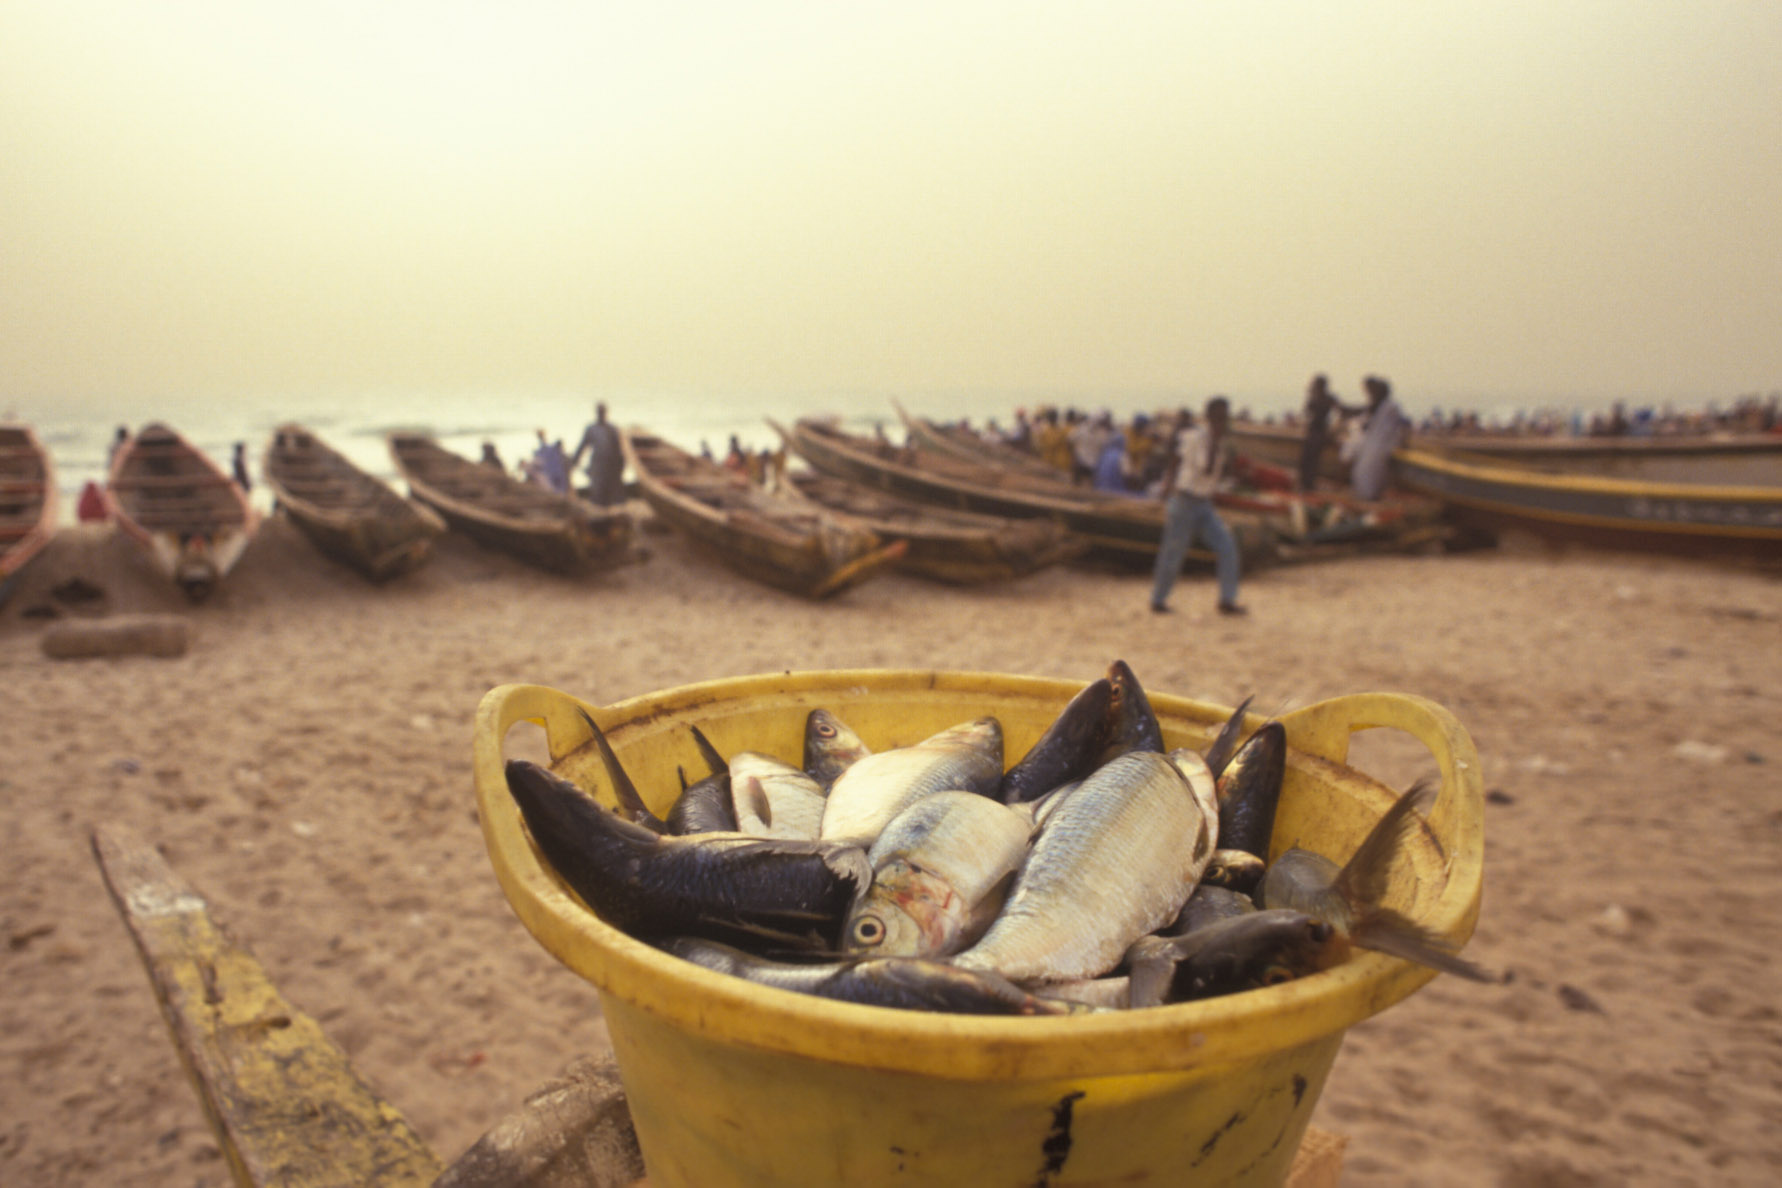 Freshly caught fish are laid out for sale on the beach at Nouakchott.The price of fresh fish fluctuates a lot over the year, as well as during the day. - - Integrated Development of Artisanal Fisheries (IDAF). The Programme for Integrated Development of Artisanal Fisheries in West Africa (IDAF), is run by the Food and Agriculture Organization of the United Nations (FAO).With headquarters in Cotonou, it is financed by the Danish International Development Agency (DANIDA) and the government of Norway. IDAF assists government departments and development agencies with the implementation of field projects that are identified, planned, and carried out with the full participation of the local population. Technical and organisational support is provided by nationally staffed Fisheries Development Units. The Programme disseminates information and organises training courses, workshops and seminars. Specialists and participants from associated countries, regularly meet to discuss ideas and strategies. Project activities may vary from improving boats and gear to providing drinking water and health care. The IDAF network covers all aspects of fisheries, including research and technology. By 1990, twenty countries from Mauritania to Angola, had taken part in the Programme.